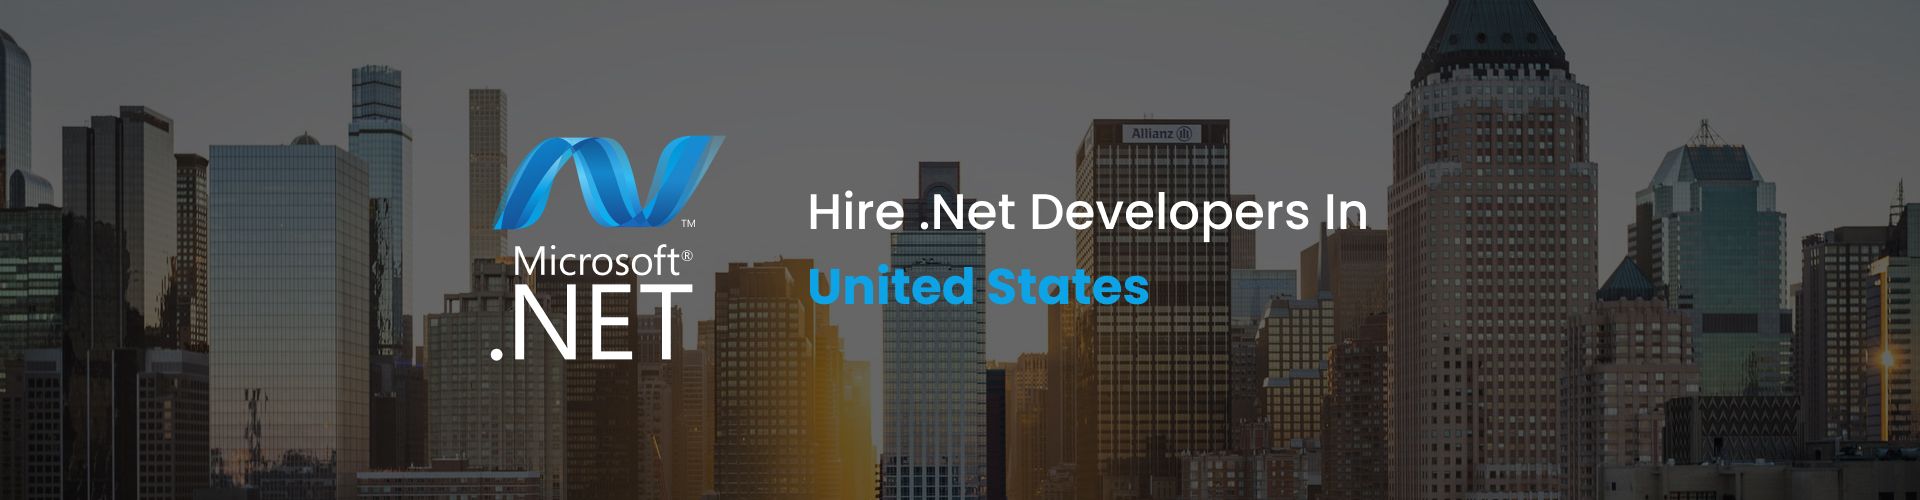 hire dot net developers in united states